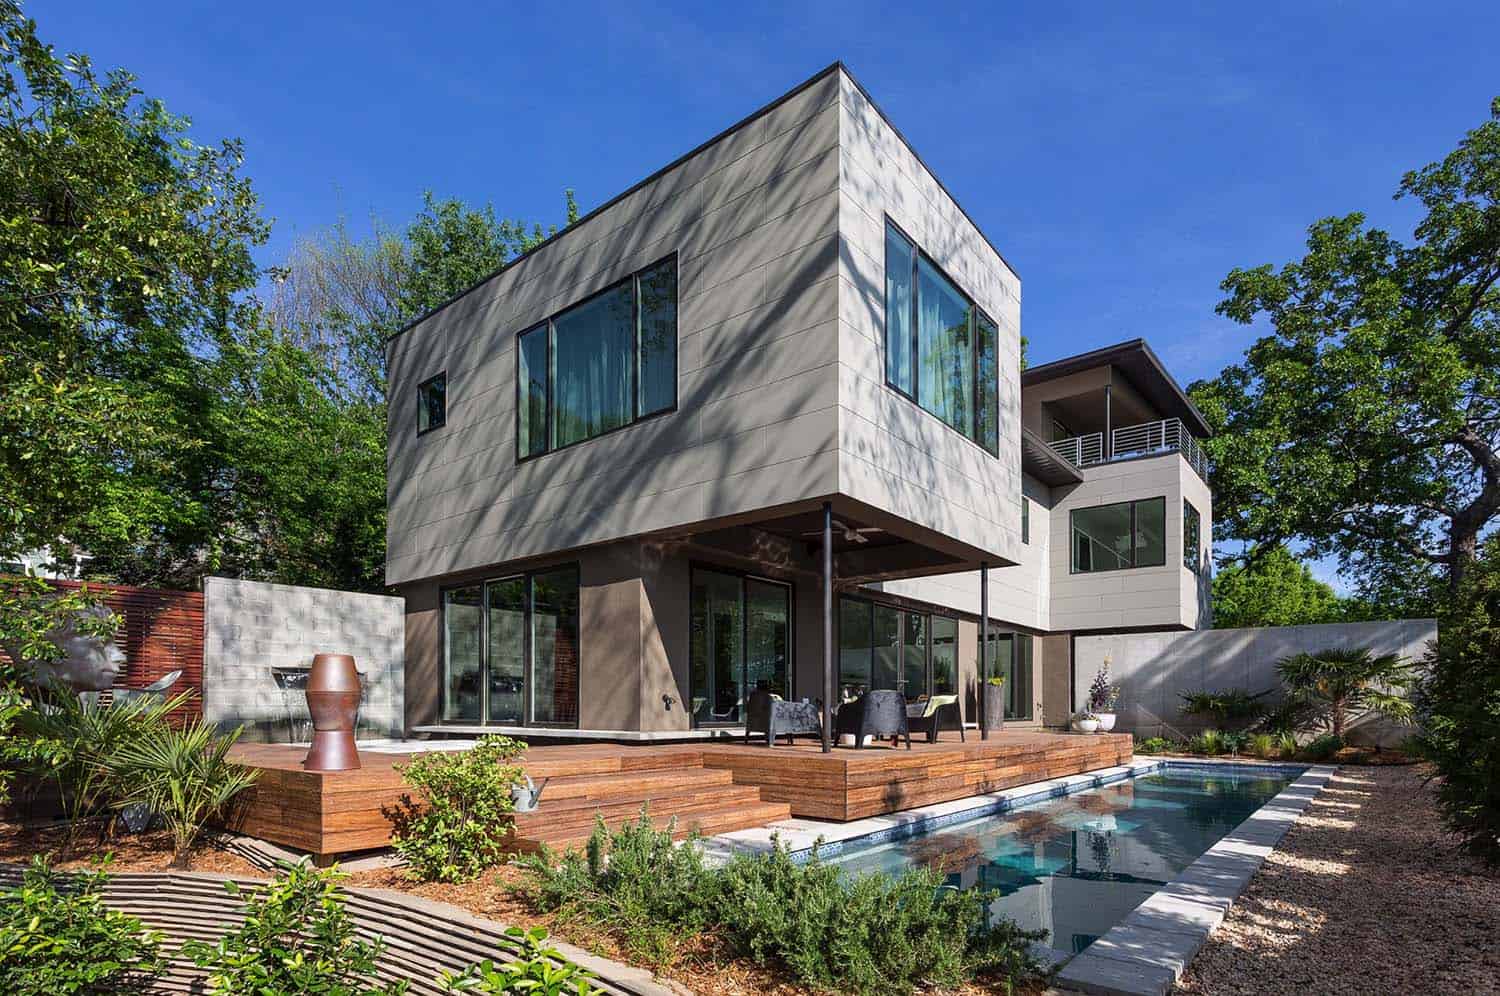 LEED Silver house in Atlanta nestles into its wooded environment